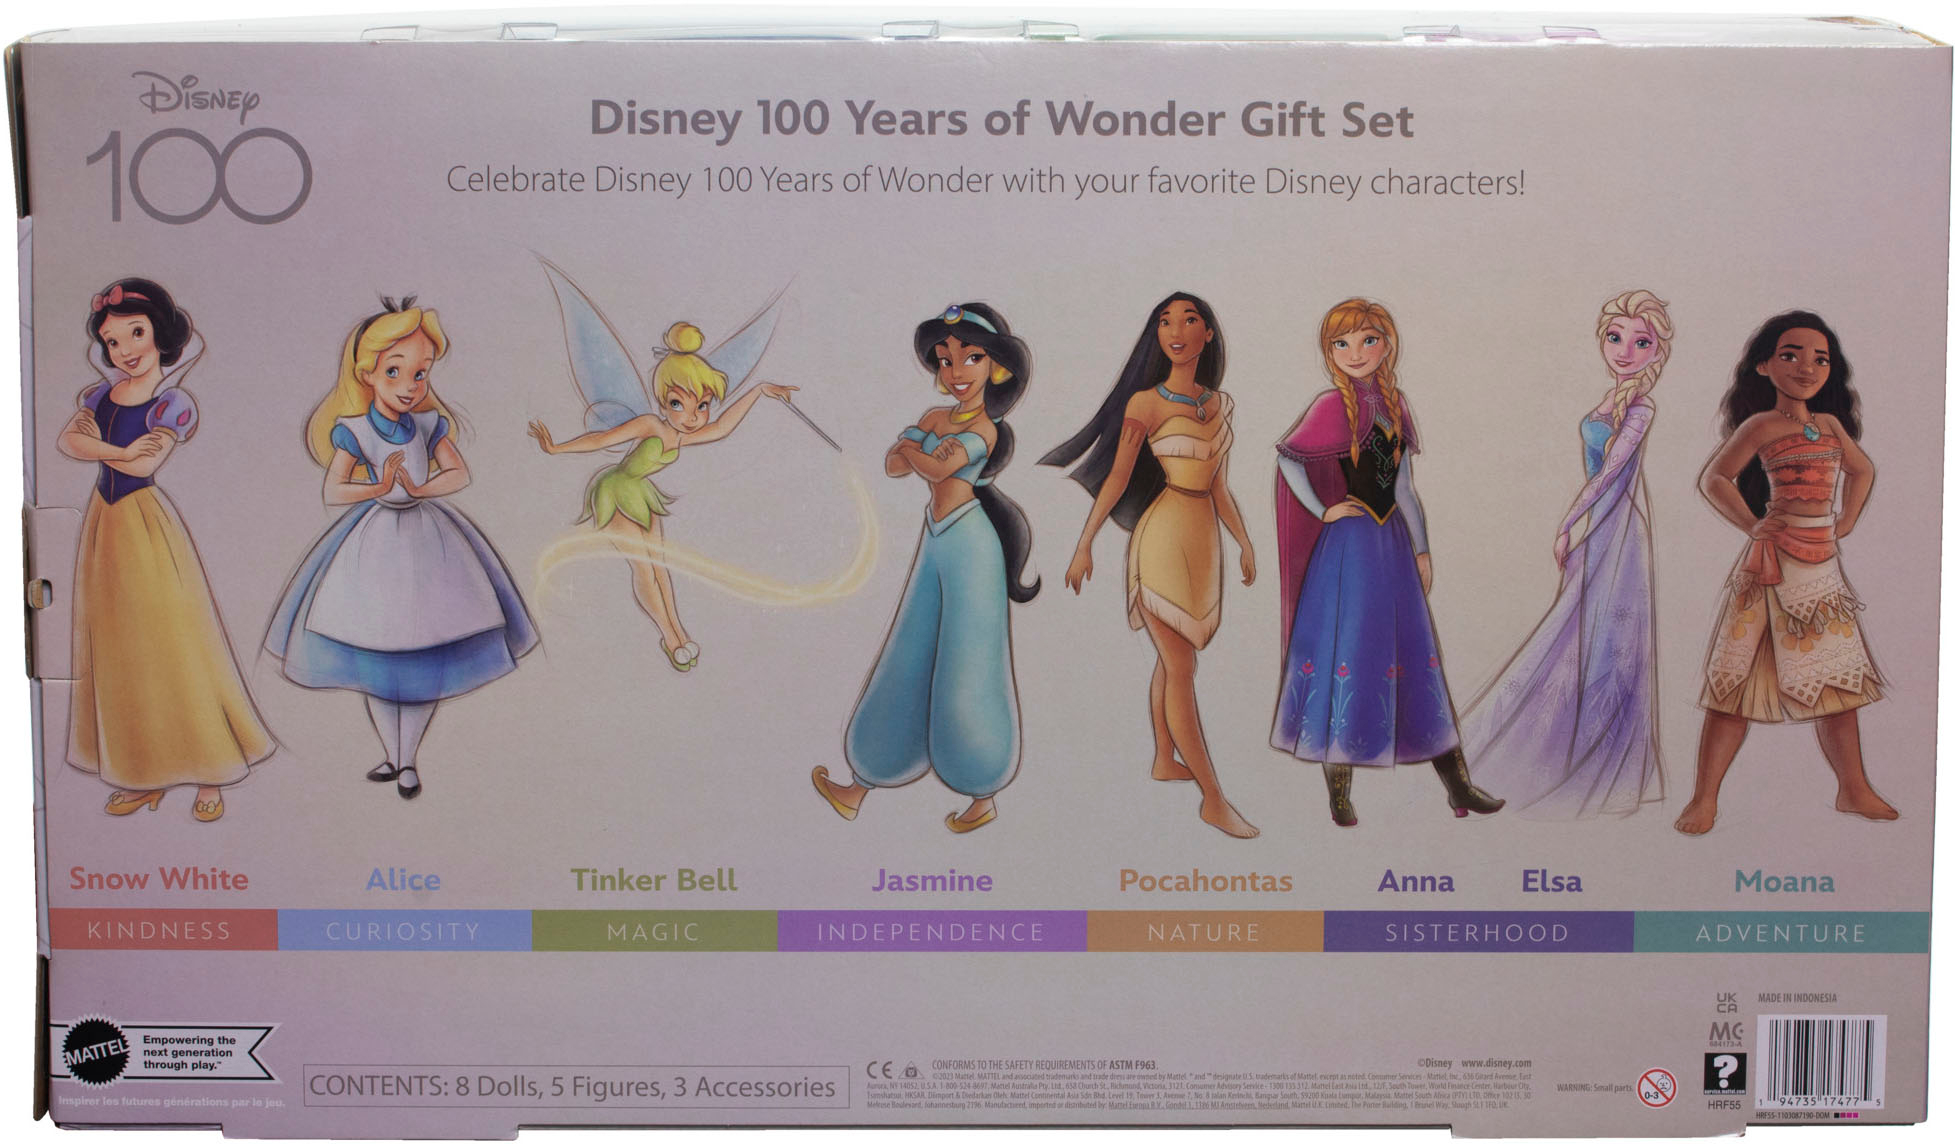 Best Disney 100 gifts and merchandise to celebrate 100th anniversary